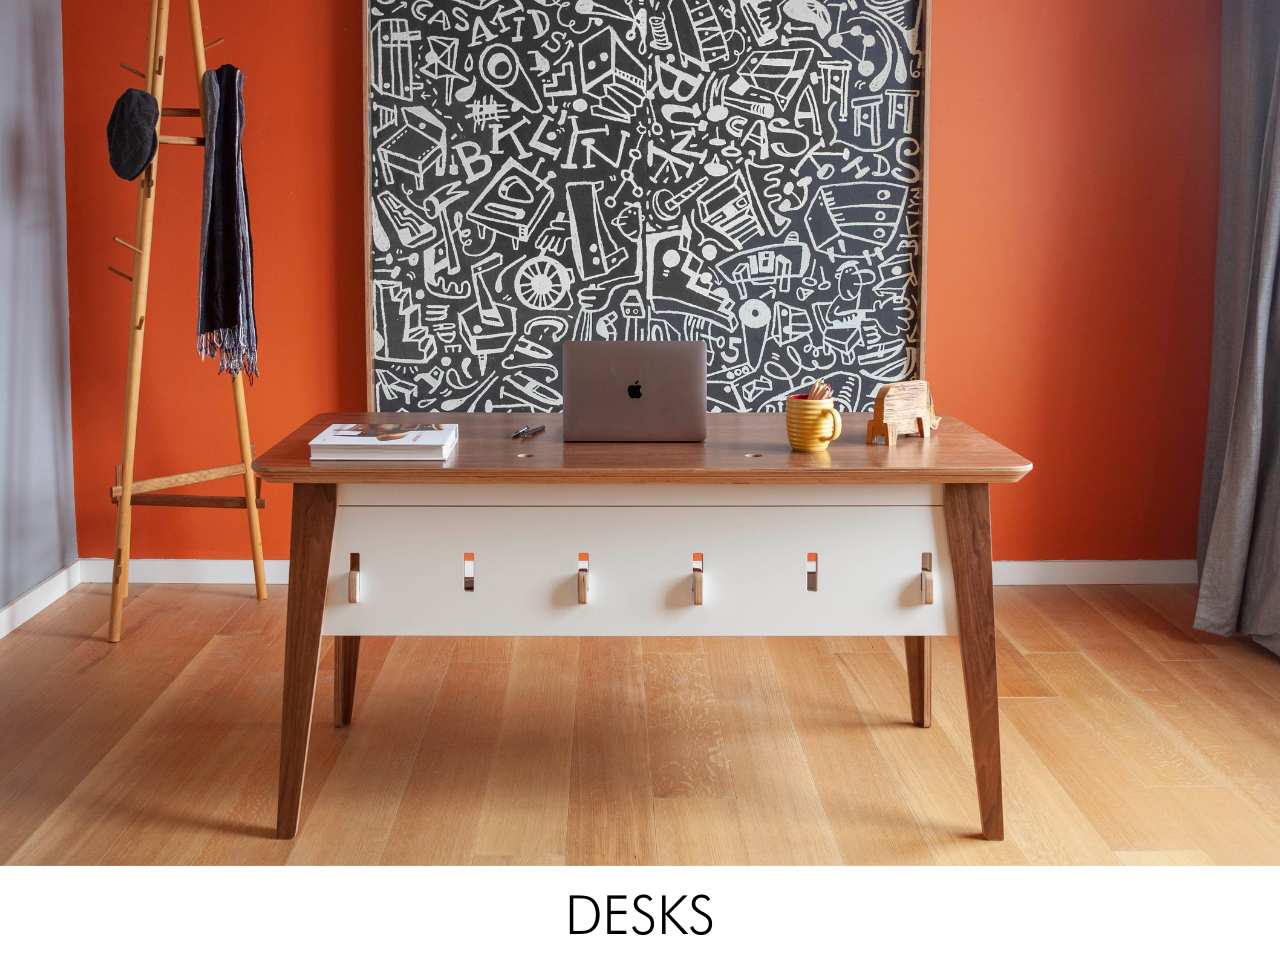 Stylish workspace with a wooden desk, laptop, vivid orange wall, and a detailed black and white mural.